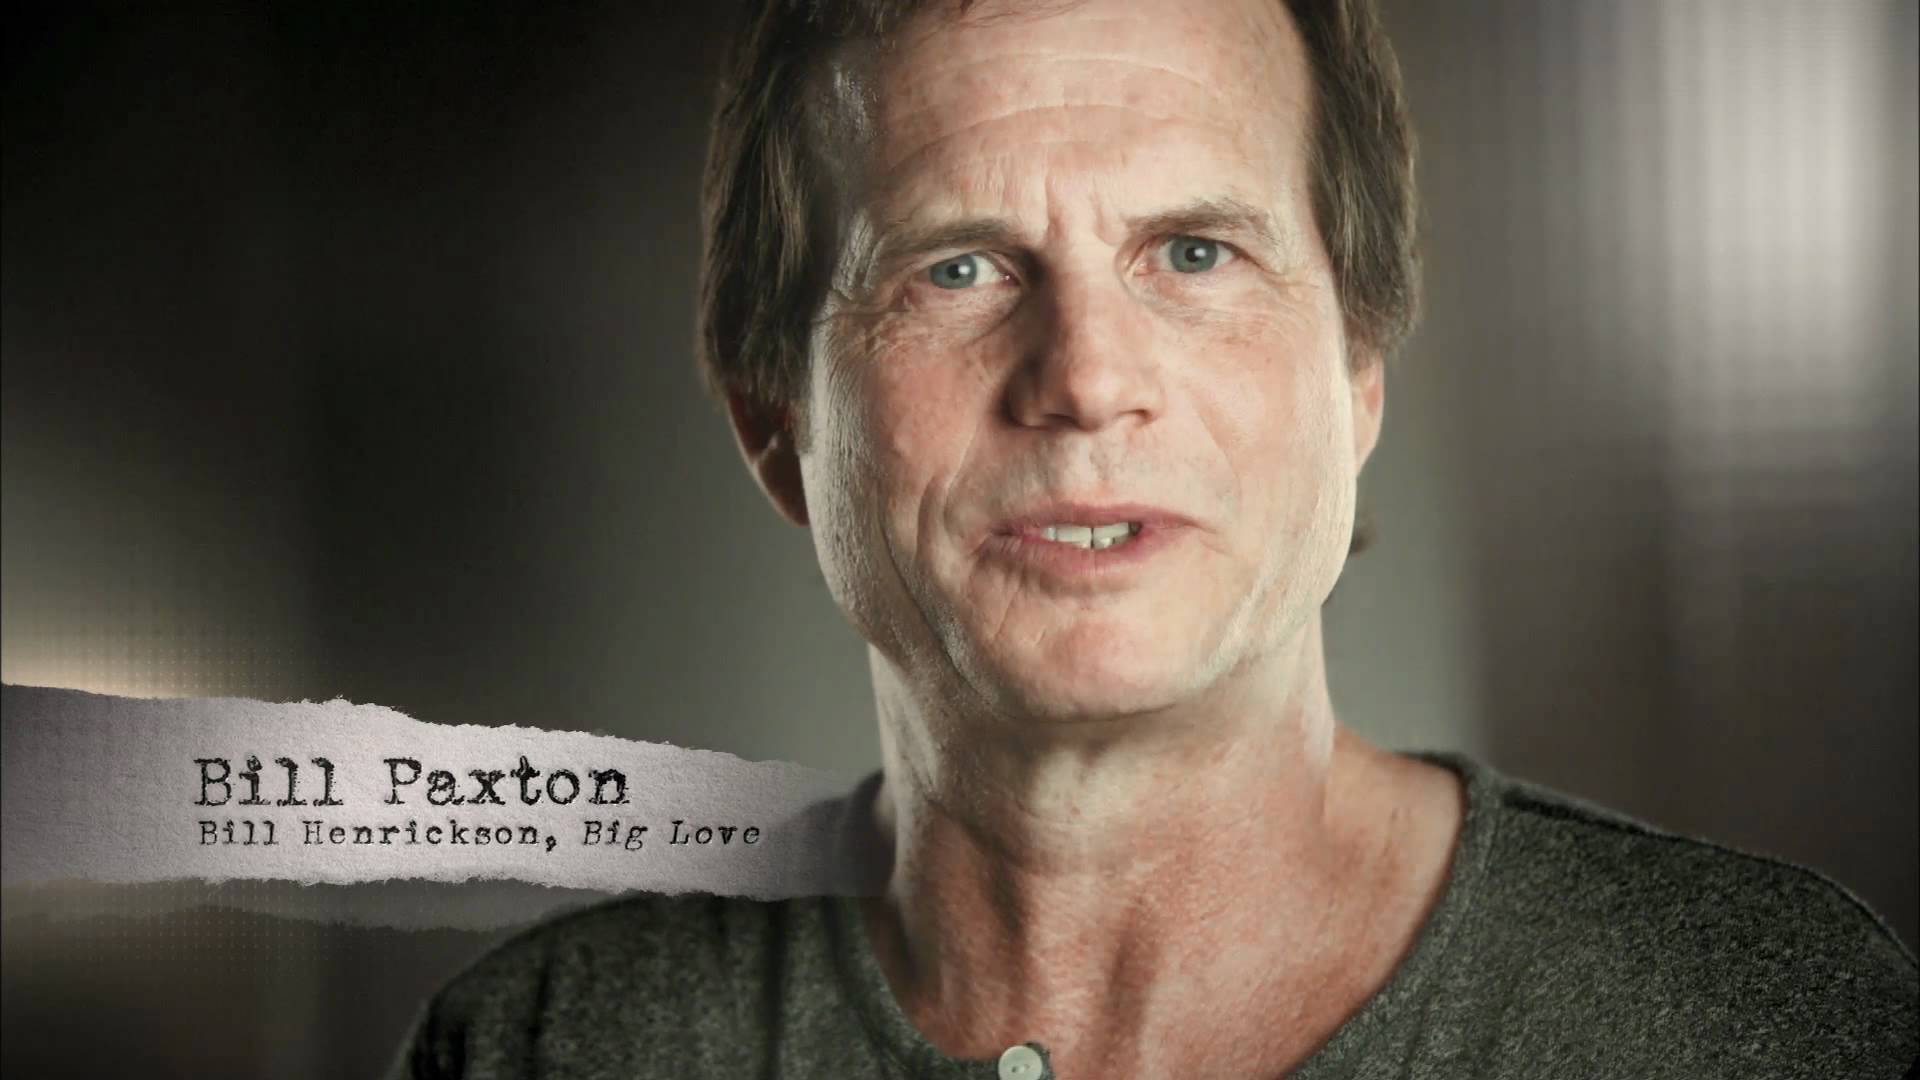 More Pictures Of Bill Paxton. 